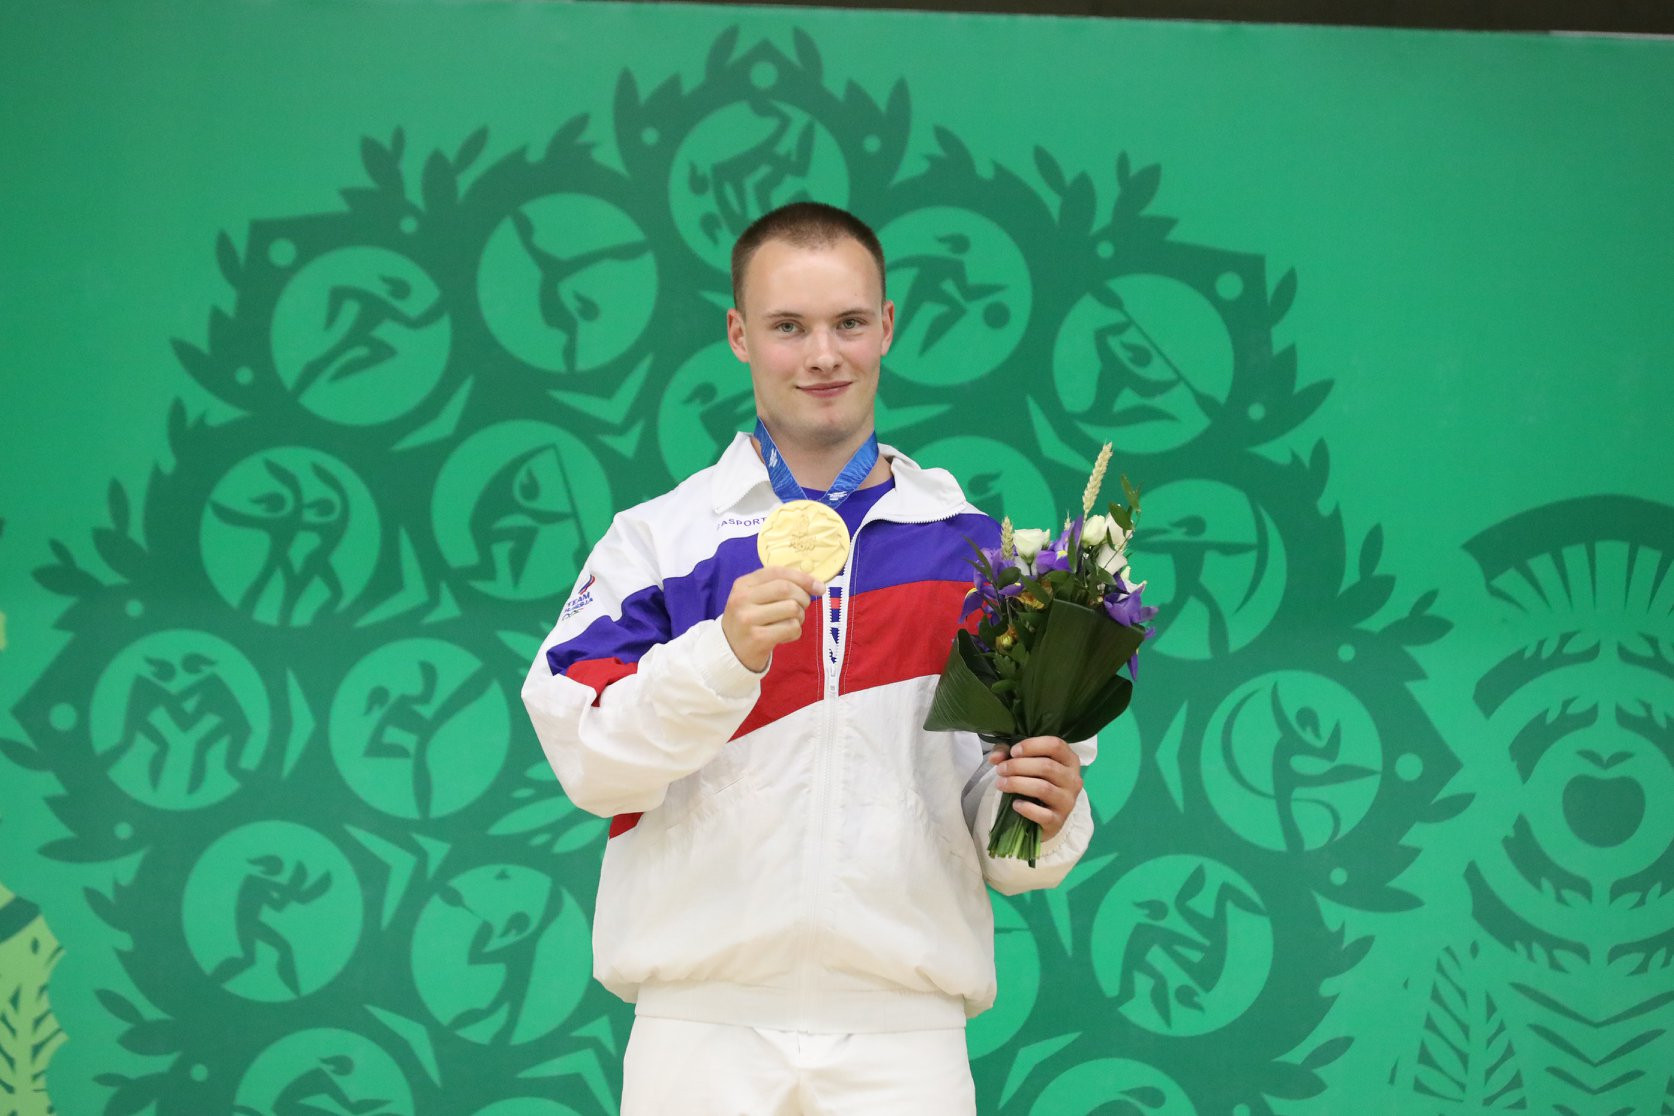 He had triumphed in the men's 10 metre air pistol event ©Minsk 2019